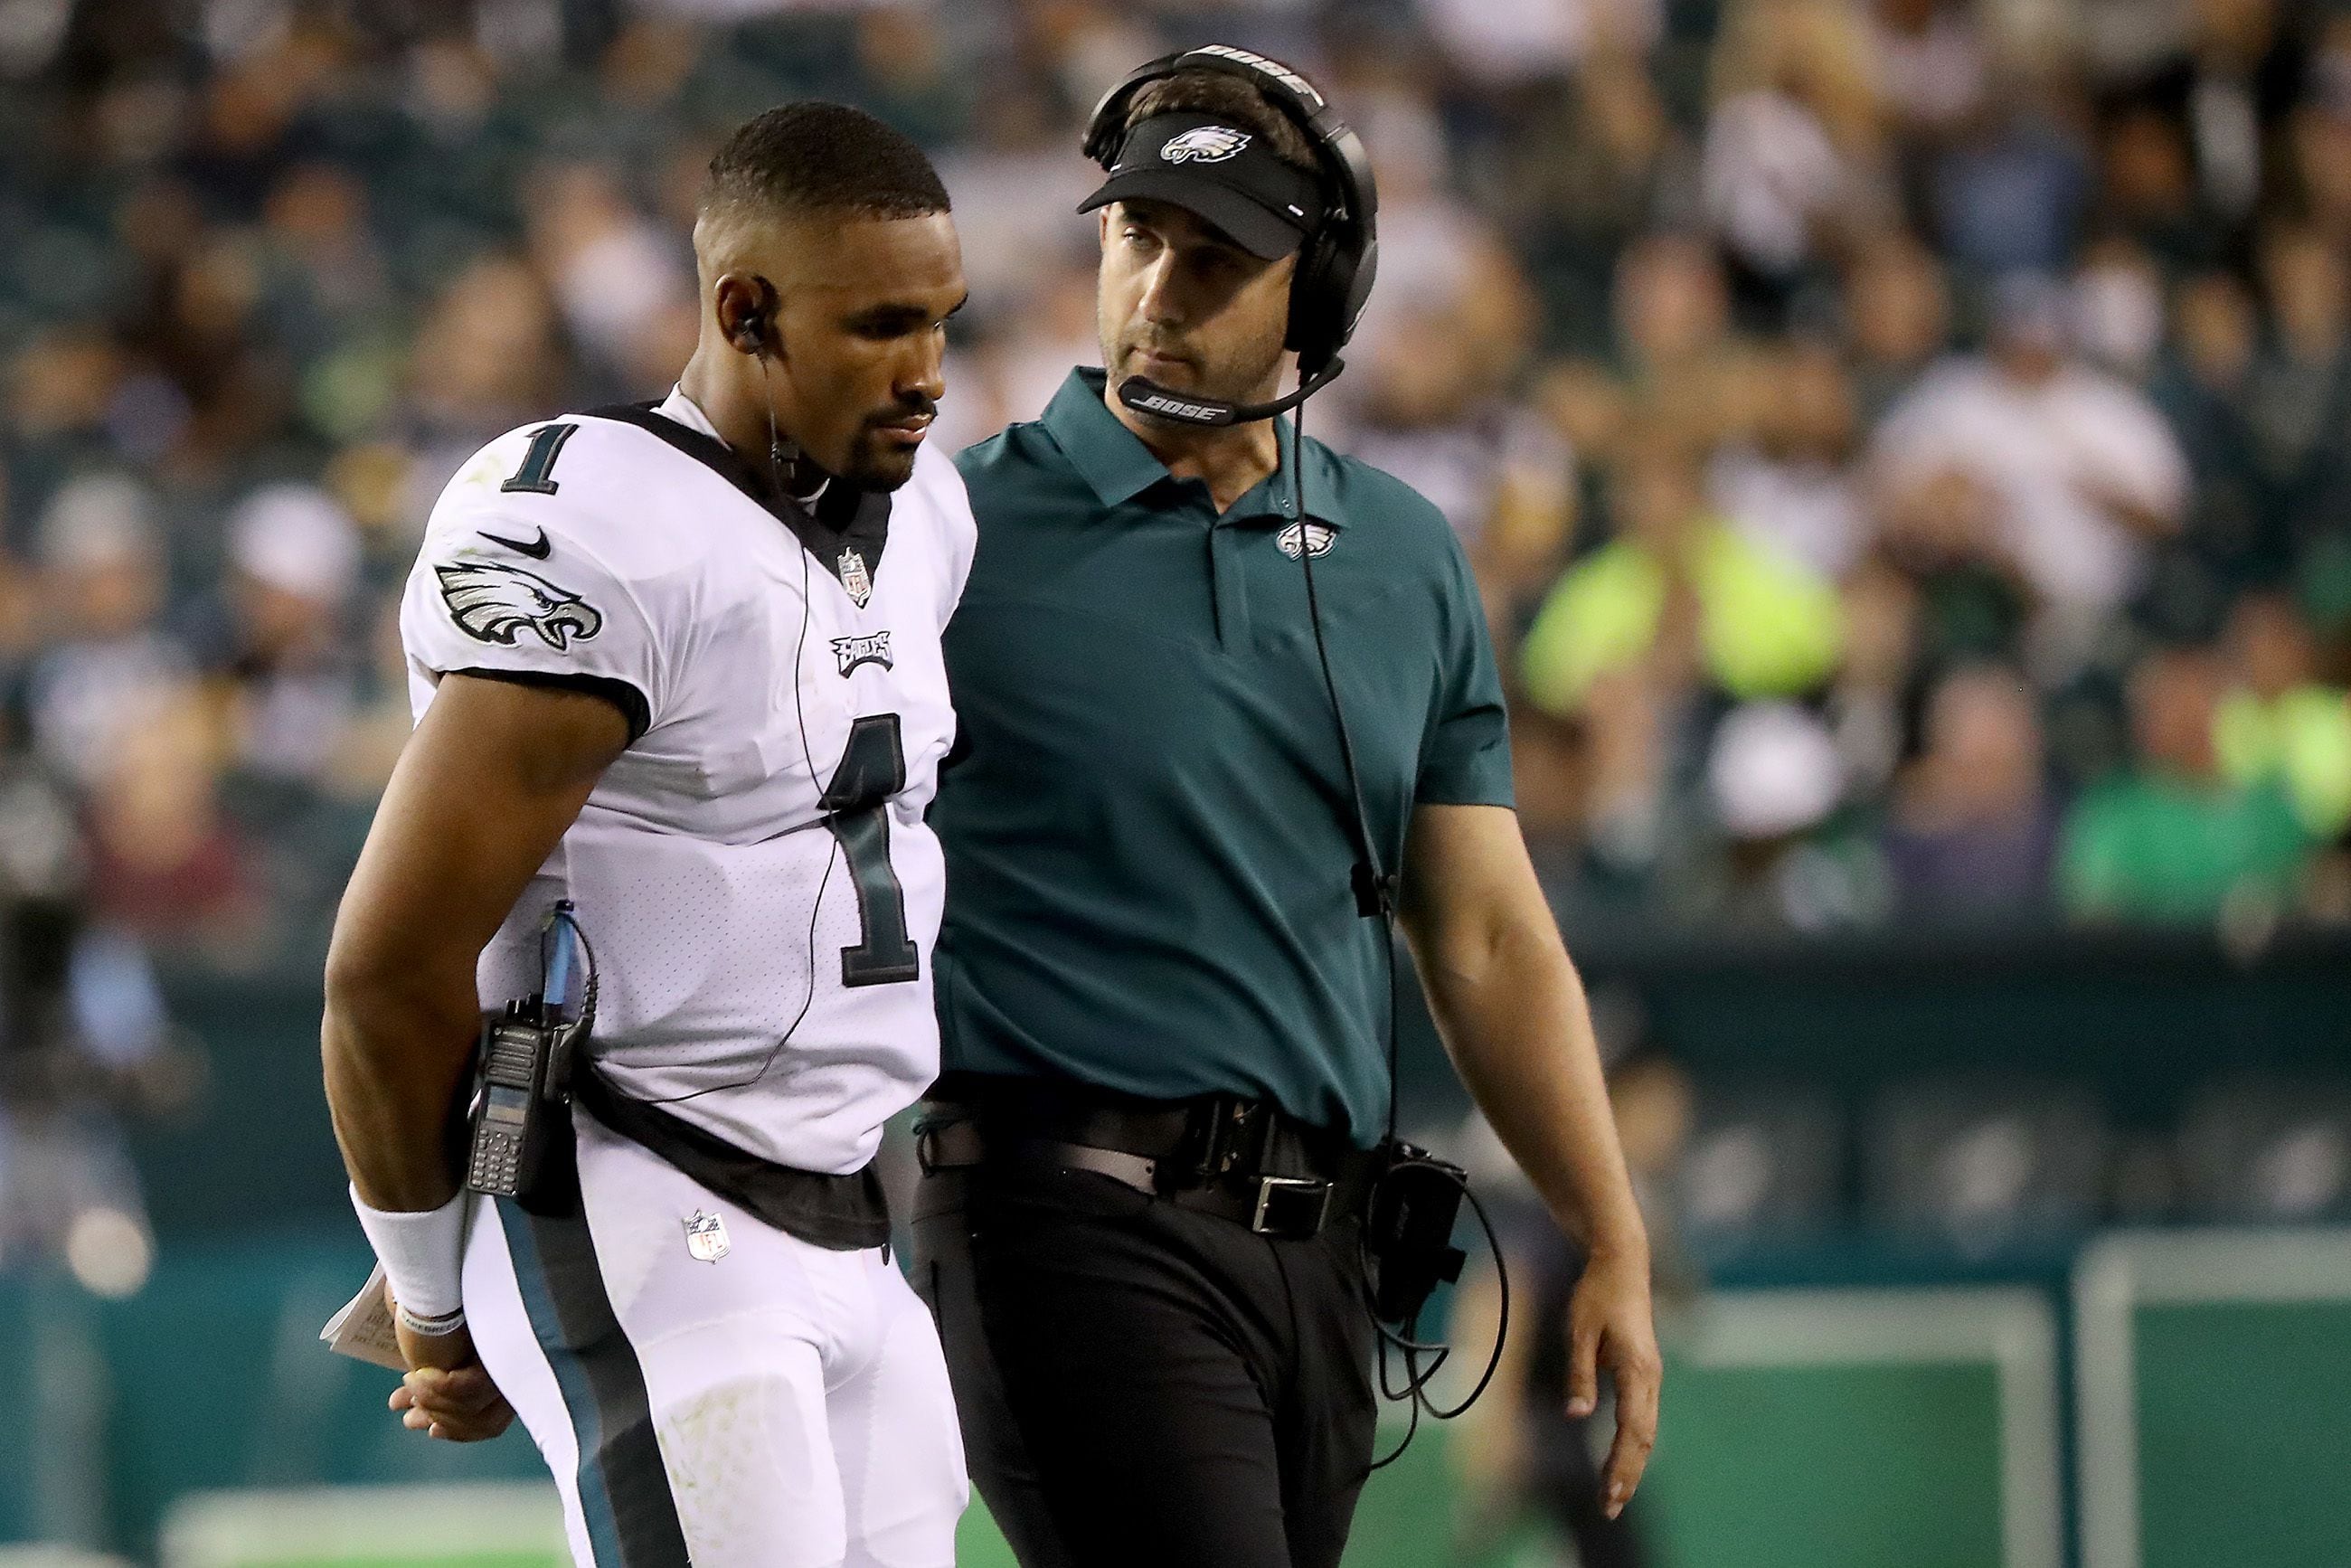 Upon further review, Eagles coach Nick Sirianni doubles down on Jalen Hurts'  first performance